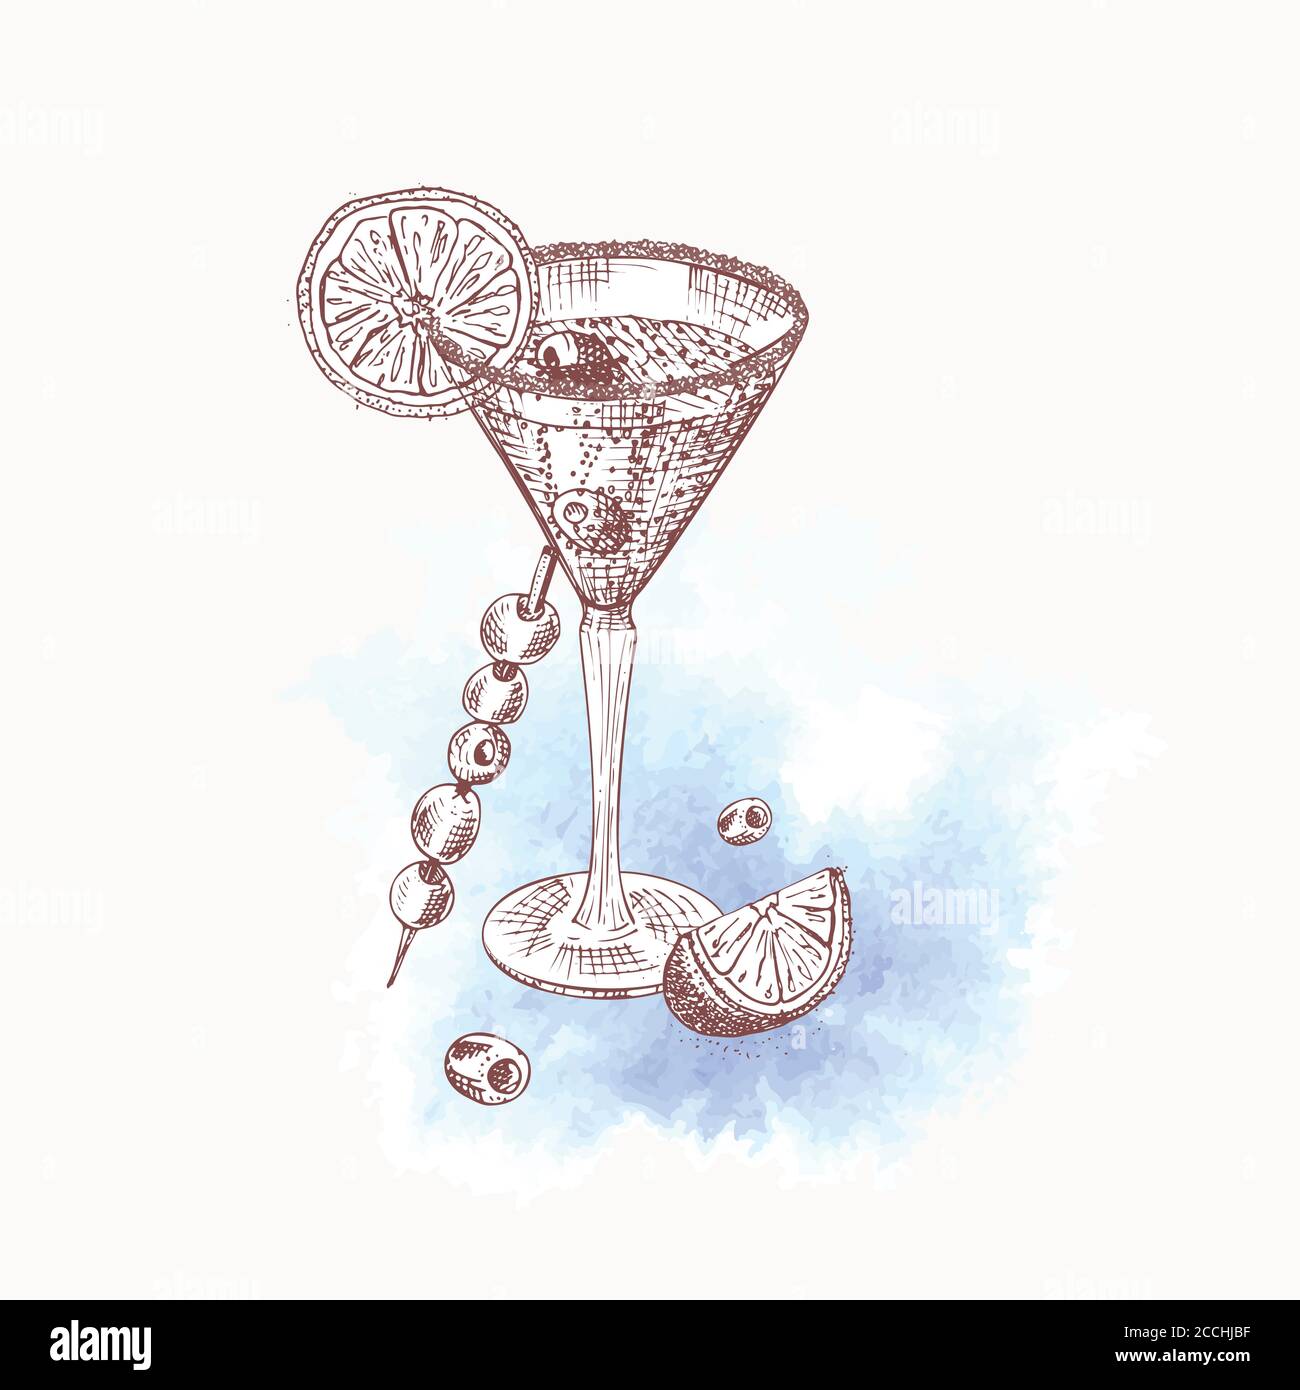 Alcoholic cocktail drink Hand drawn sketch art on watercolor background champagne, bubbly, fizz Vintage design for bar, restaurant, cafe menu, flyer Stock Vector